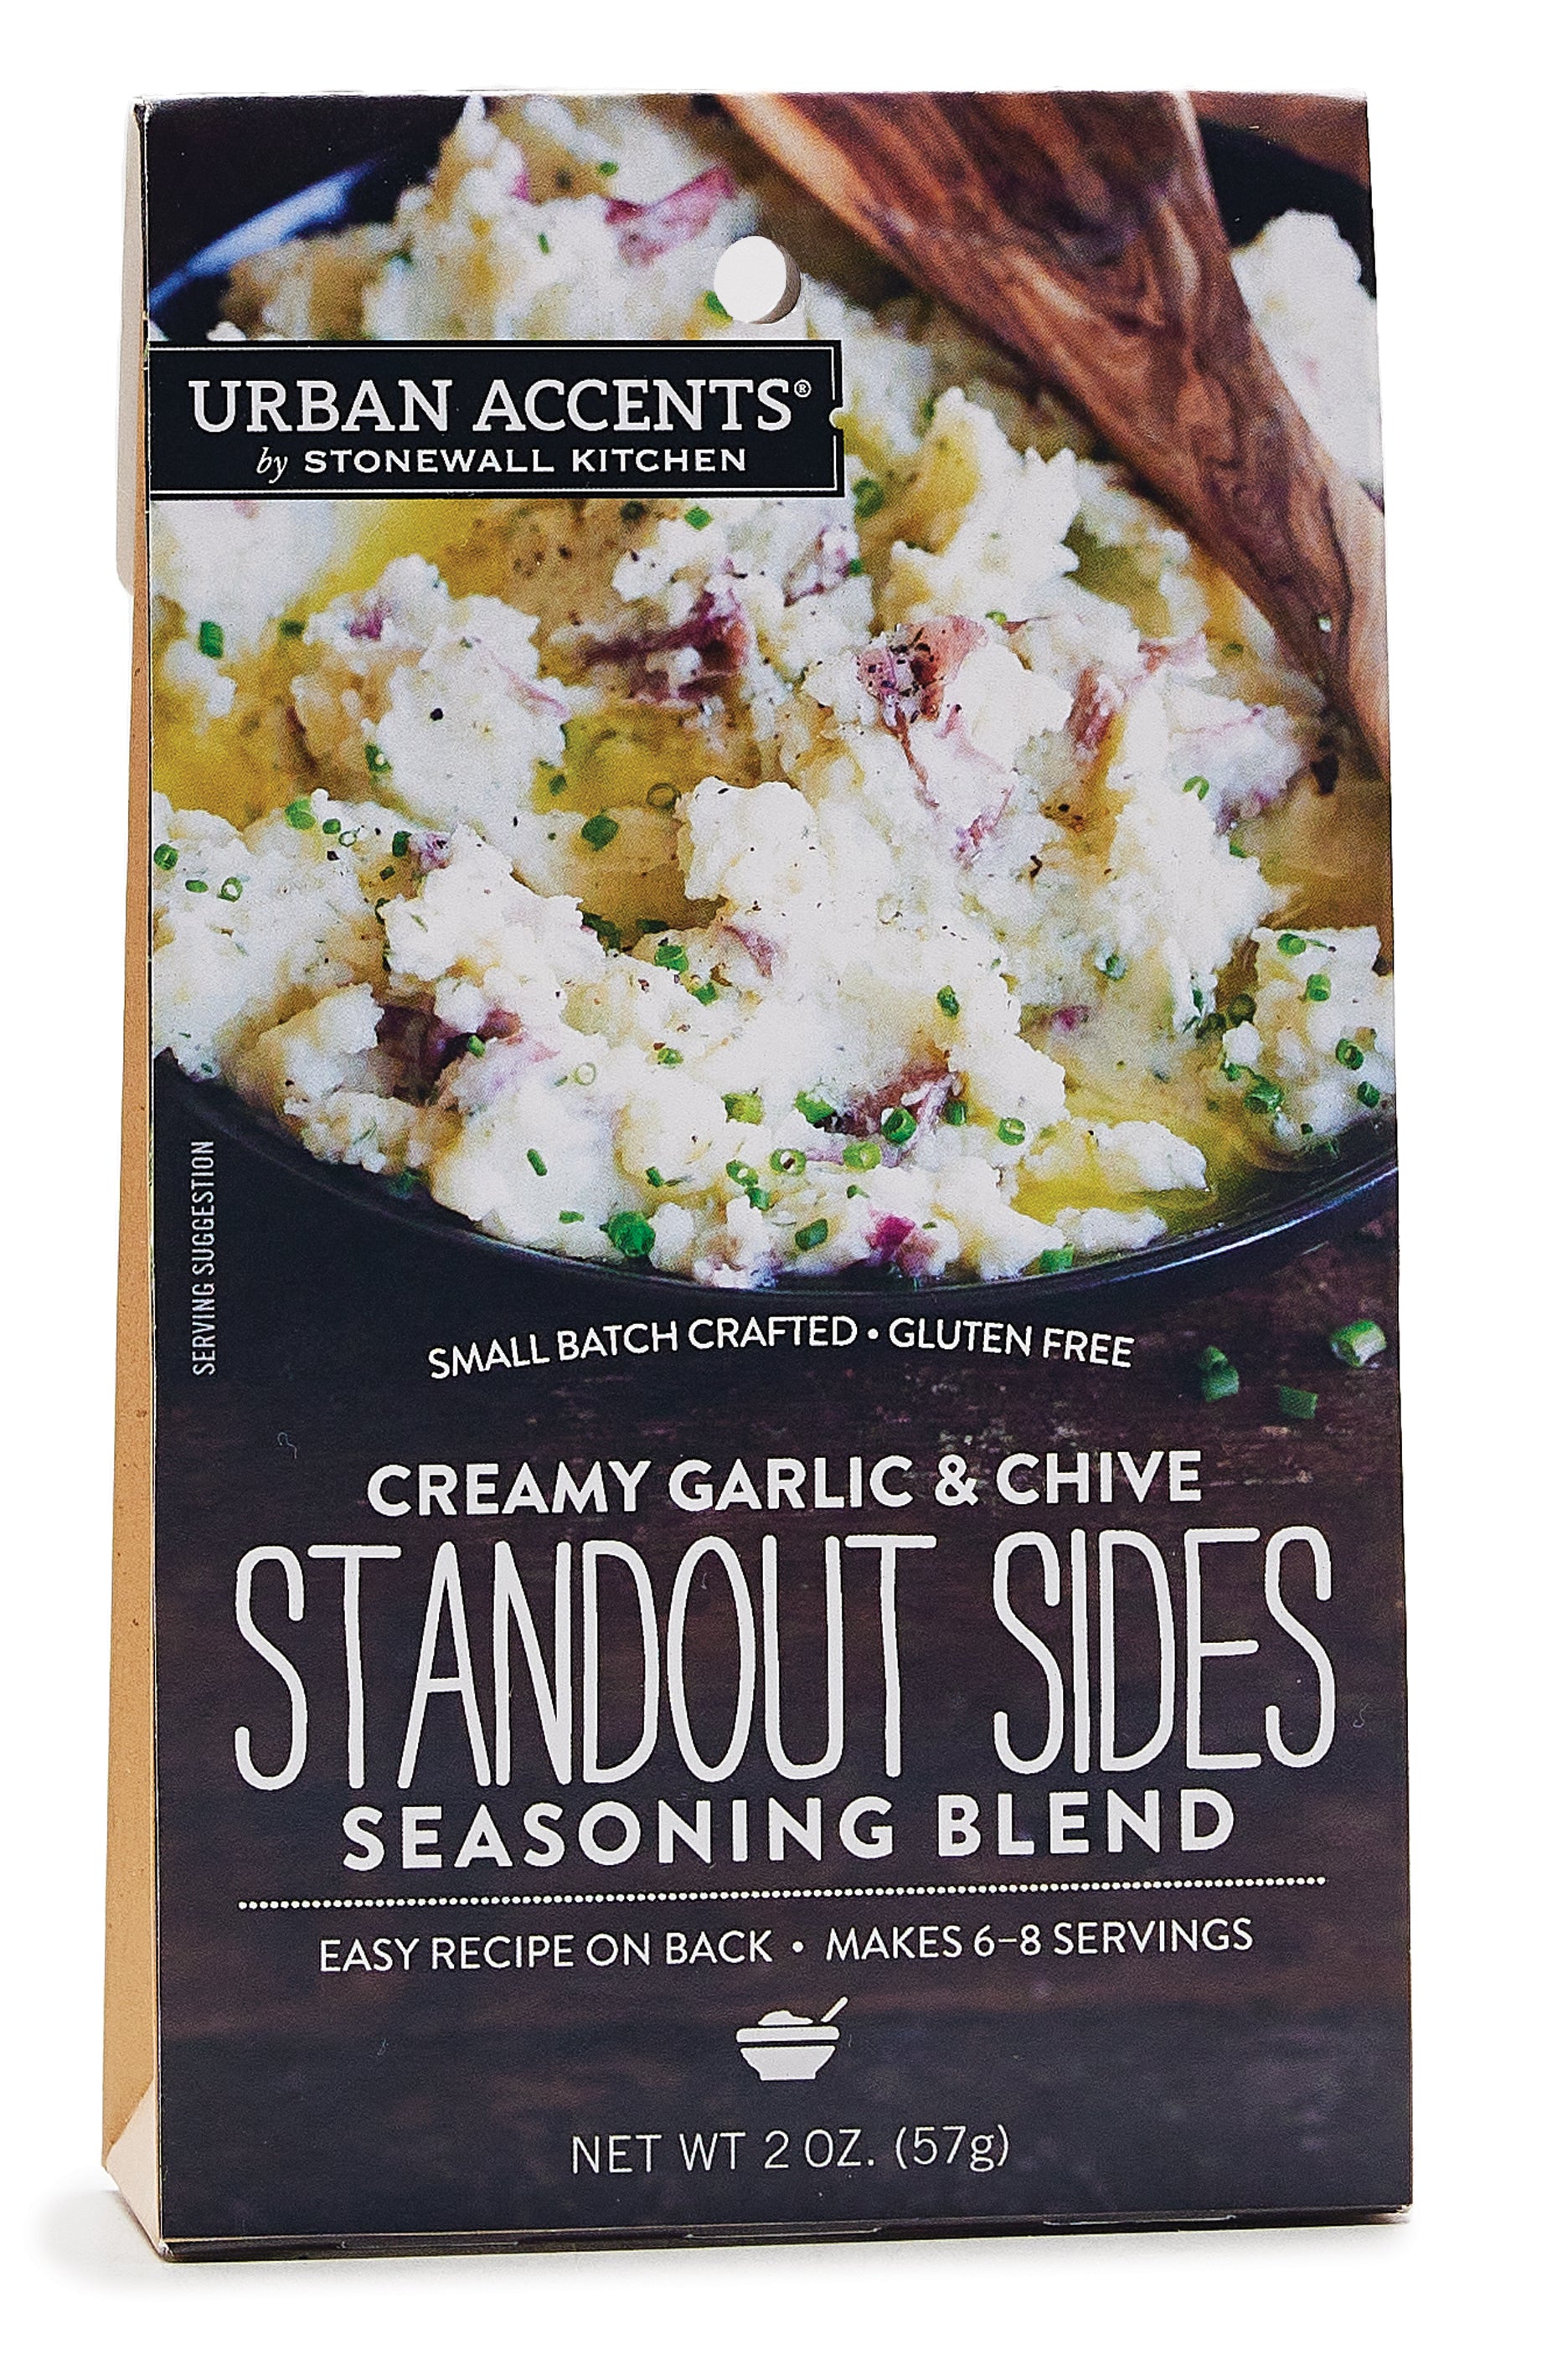 Urban Accents Creamy Garlic and Chive Standout Sides Seasoning Blend - Olive Oil Etcetera 